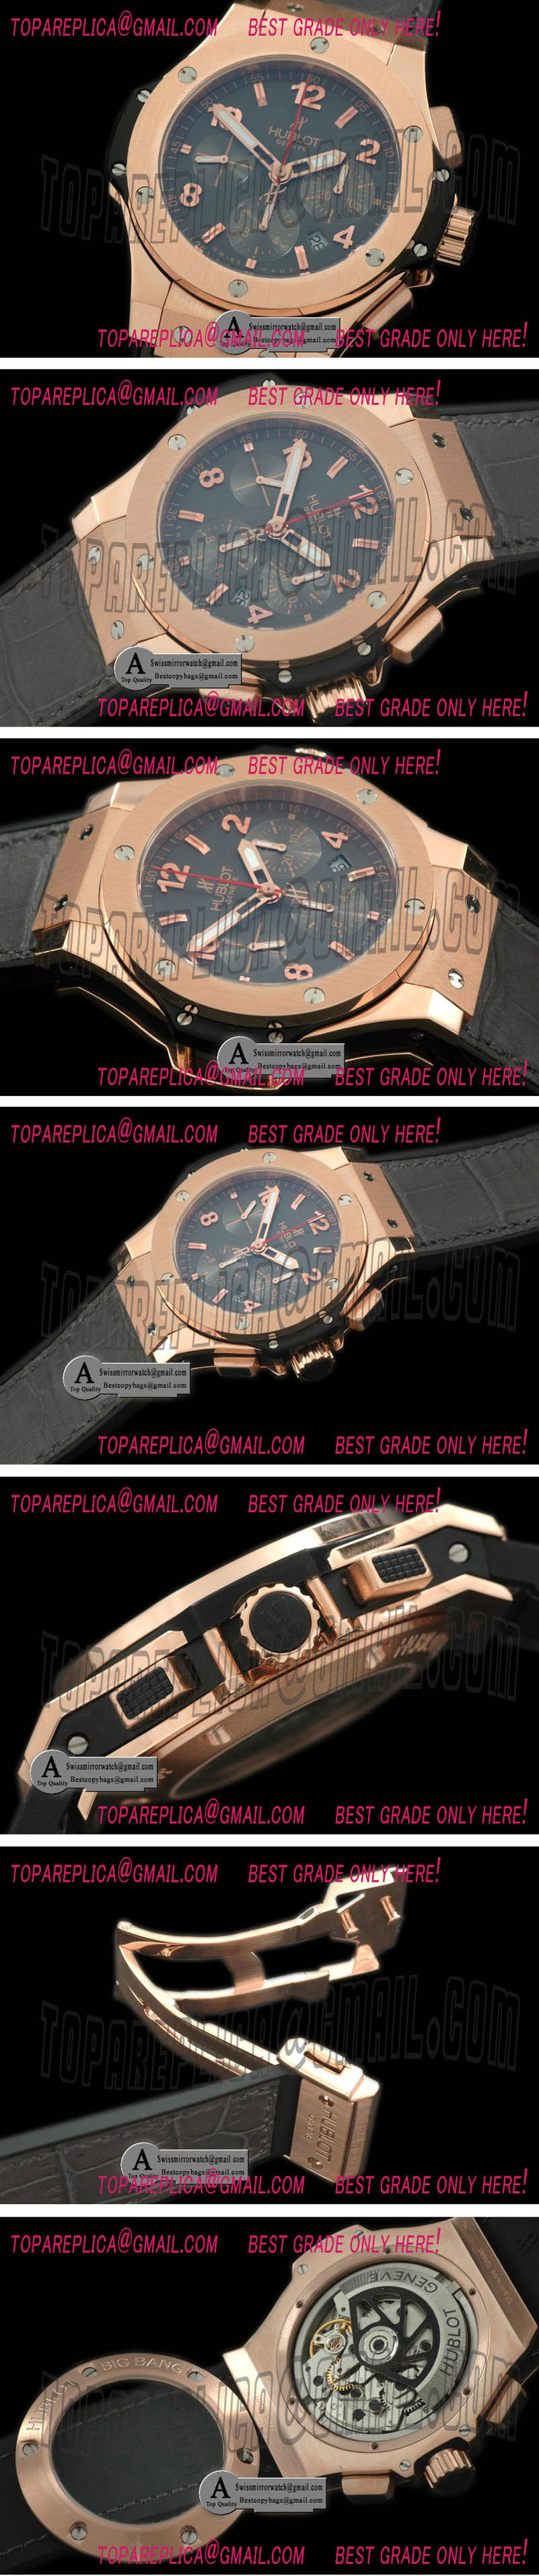 Hublot Big Bang Earl Grey Limited Editions Rose Gold/Leather Grey A-7750 Replica Watches